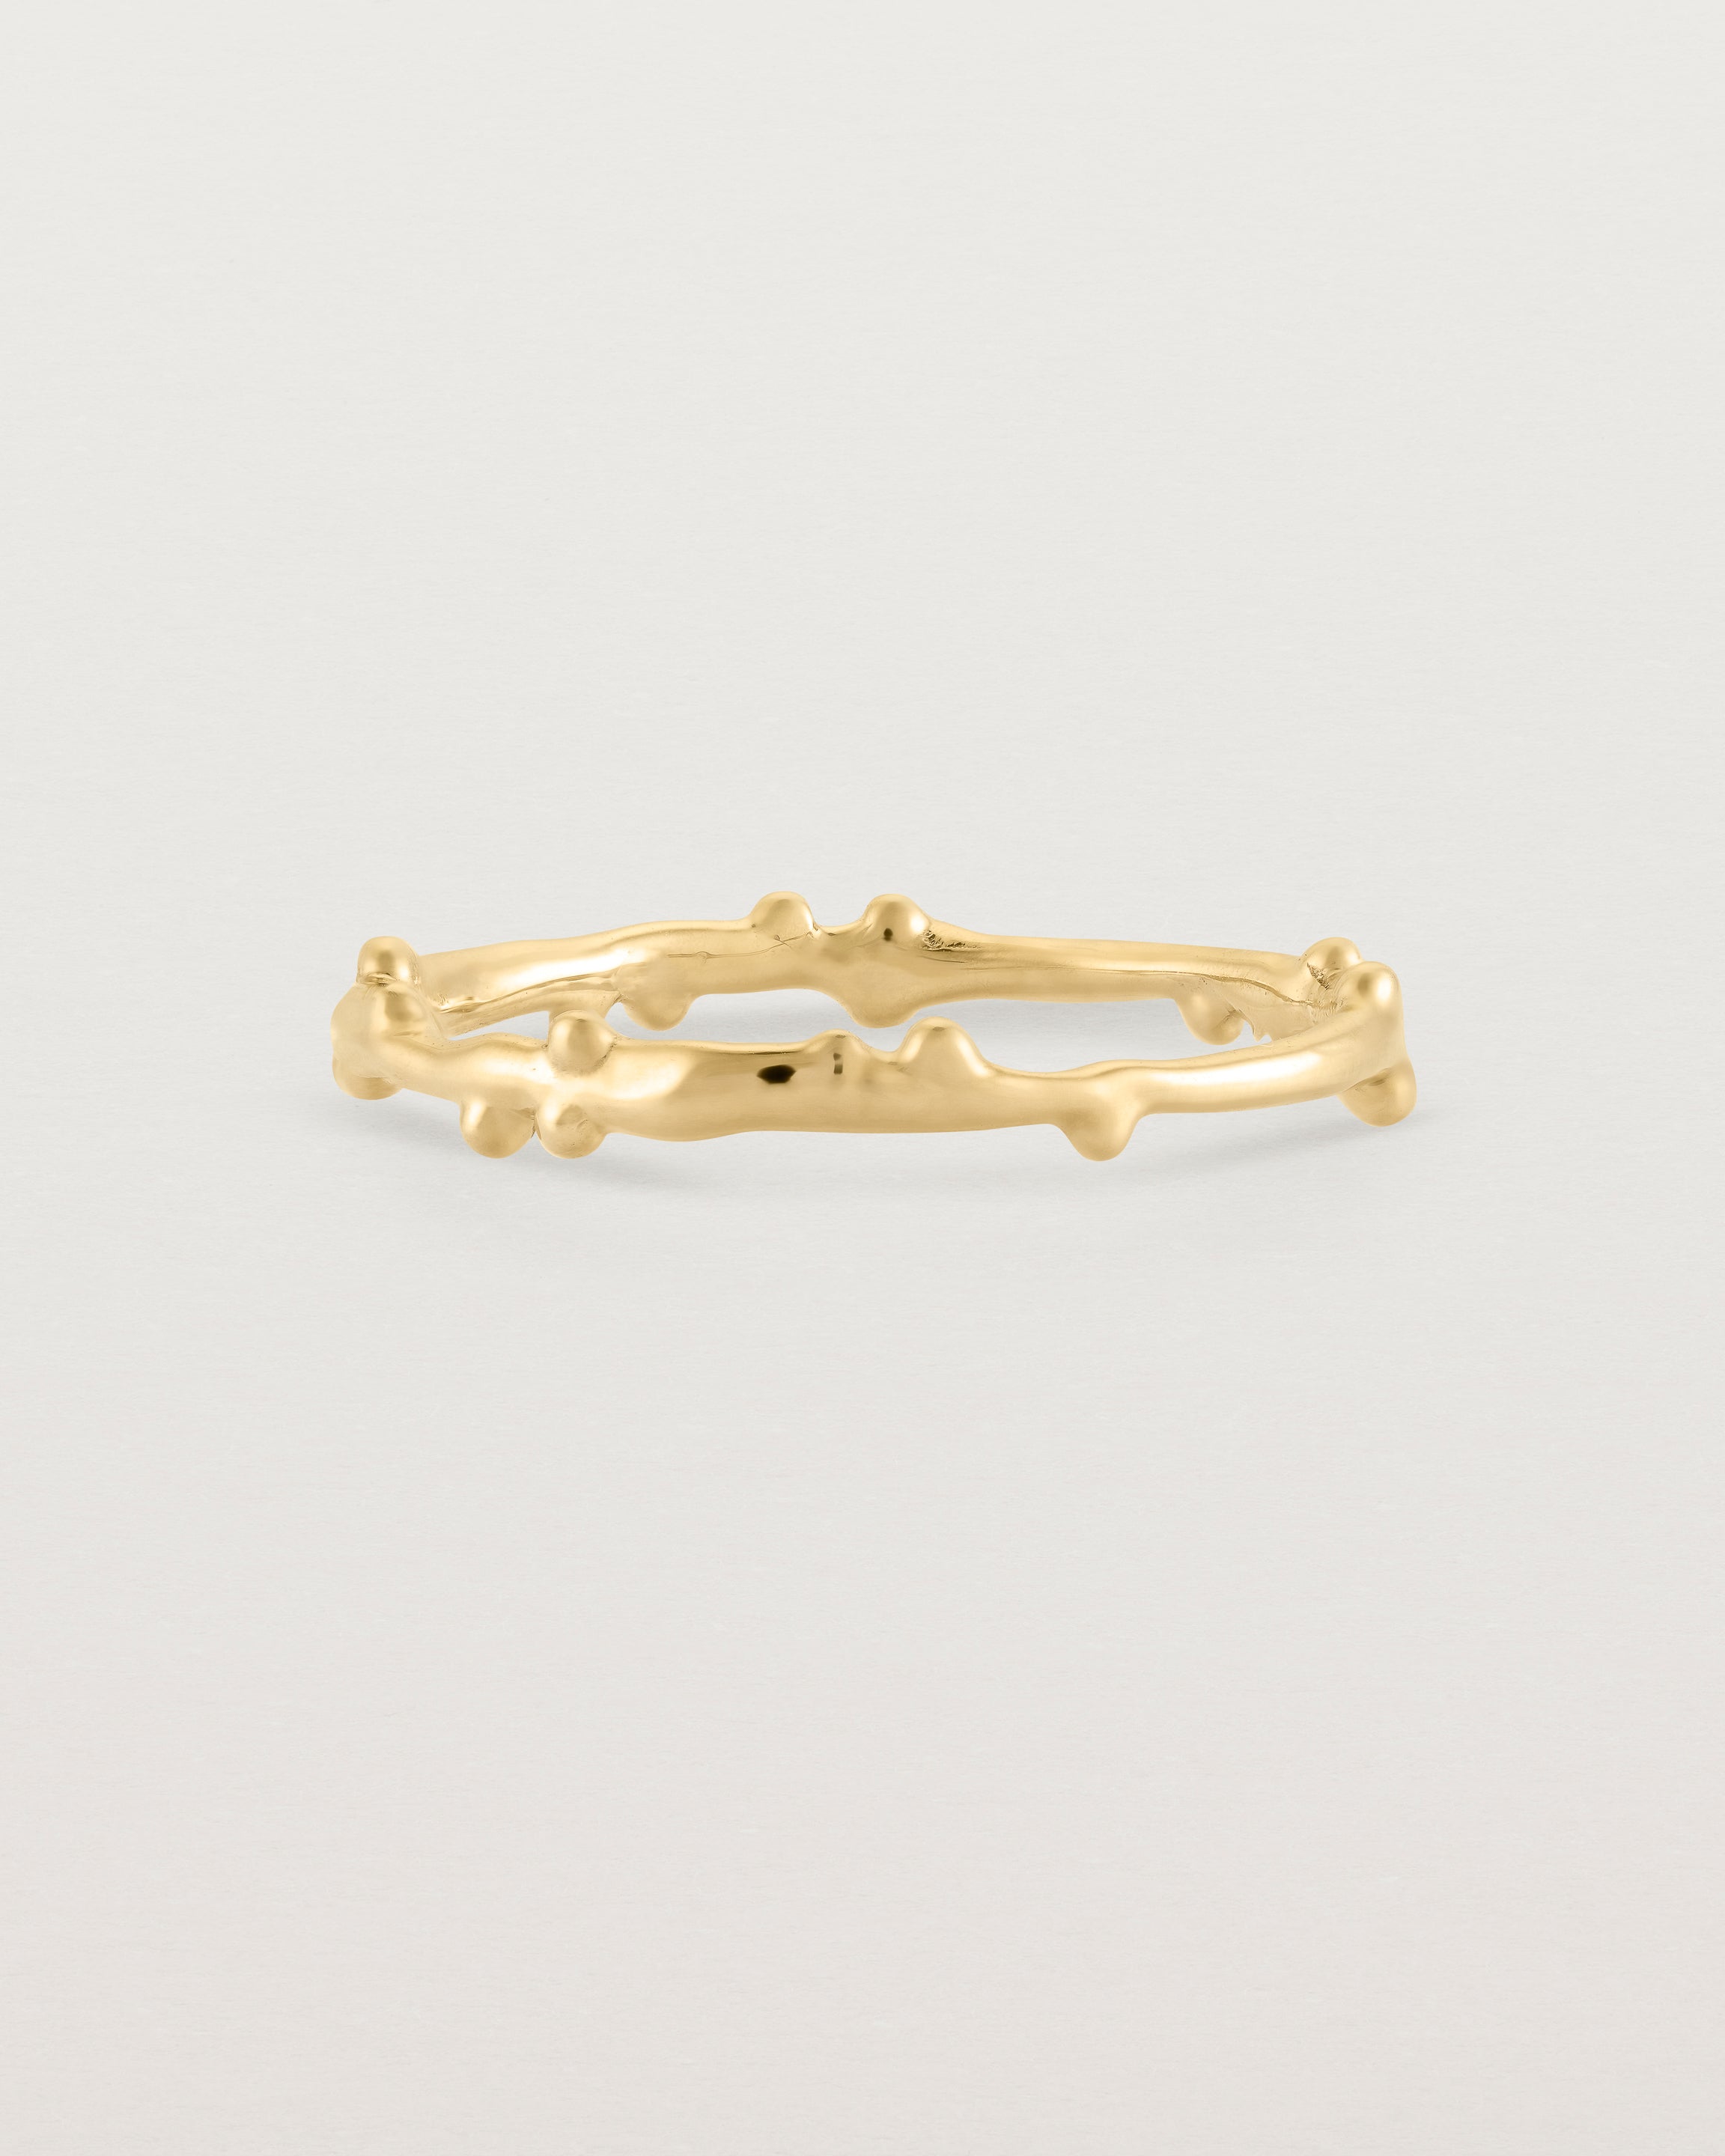 The Dotted Organic Stacking Ring in Yellow Gold.